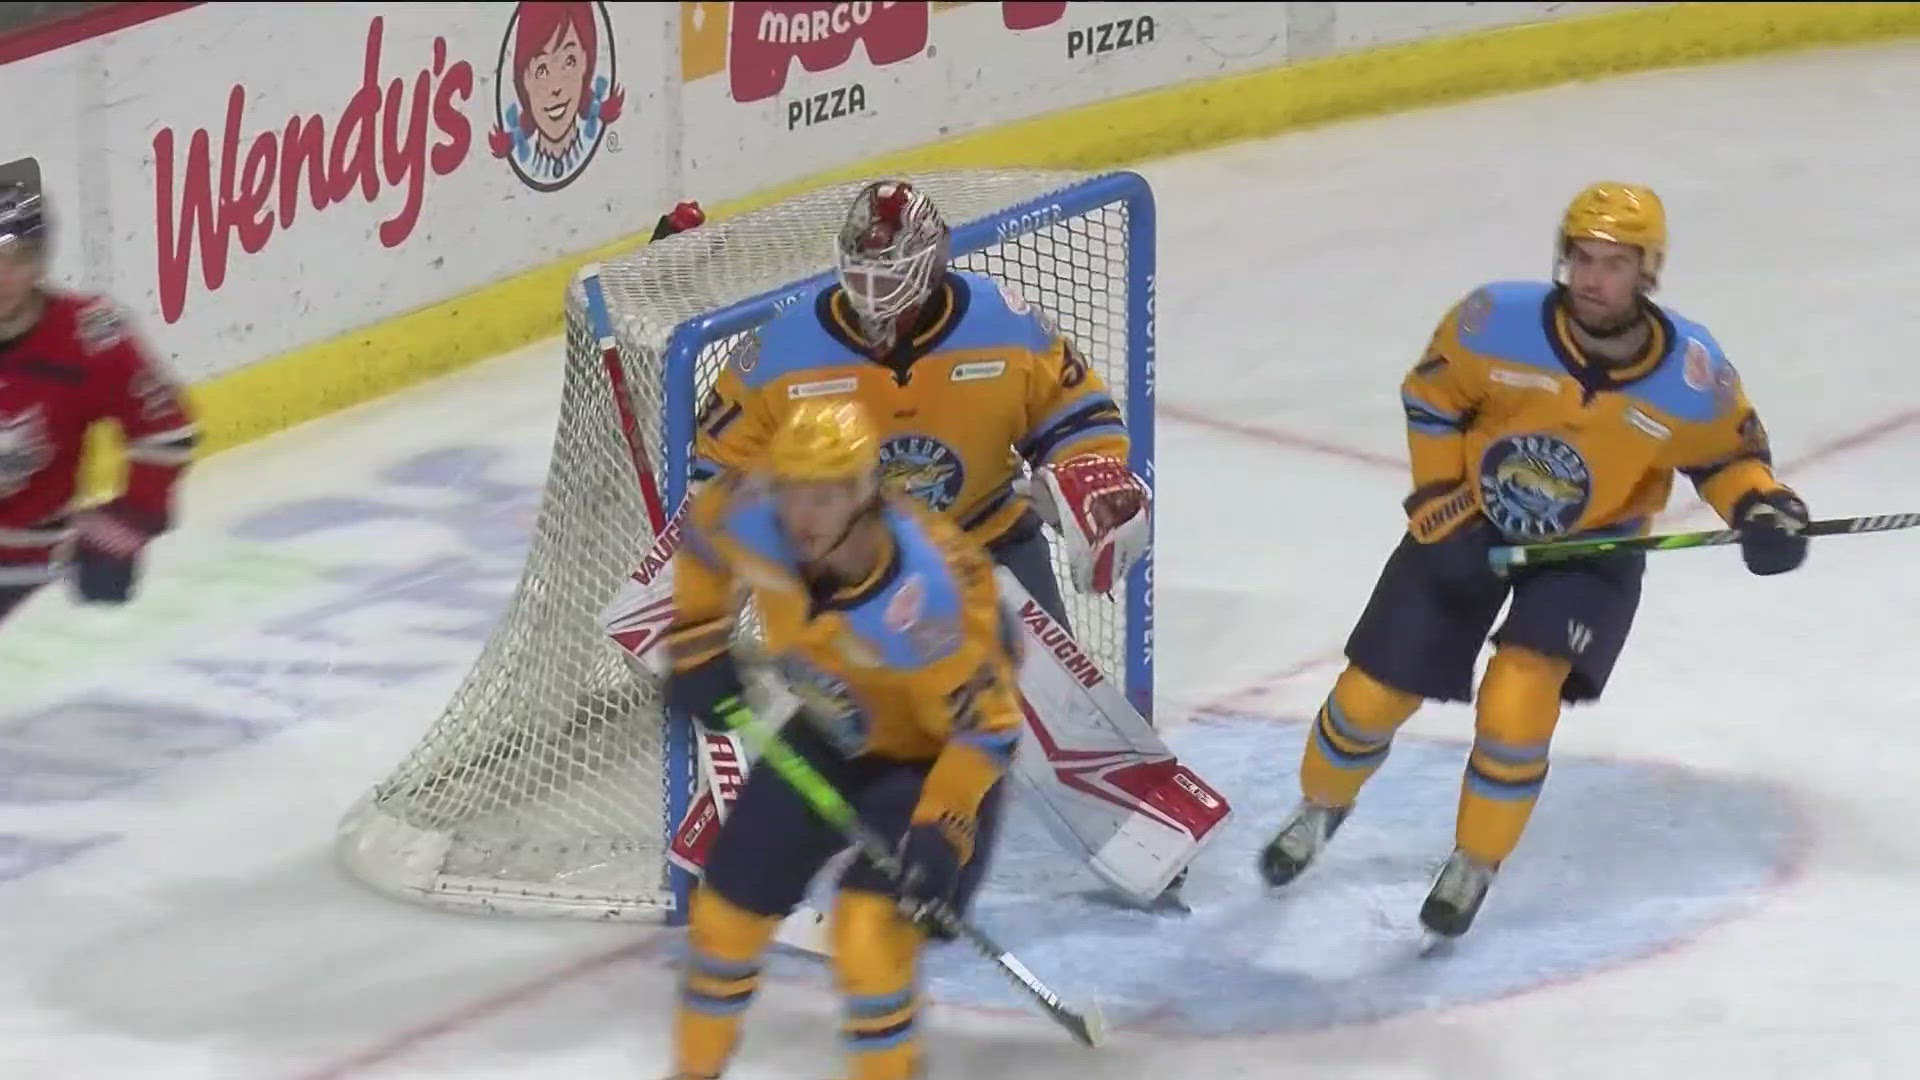 The Walleye take on the Wheeling Nailers in the second round of the playoffs beginning Friday night.